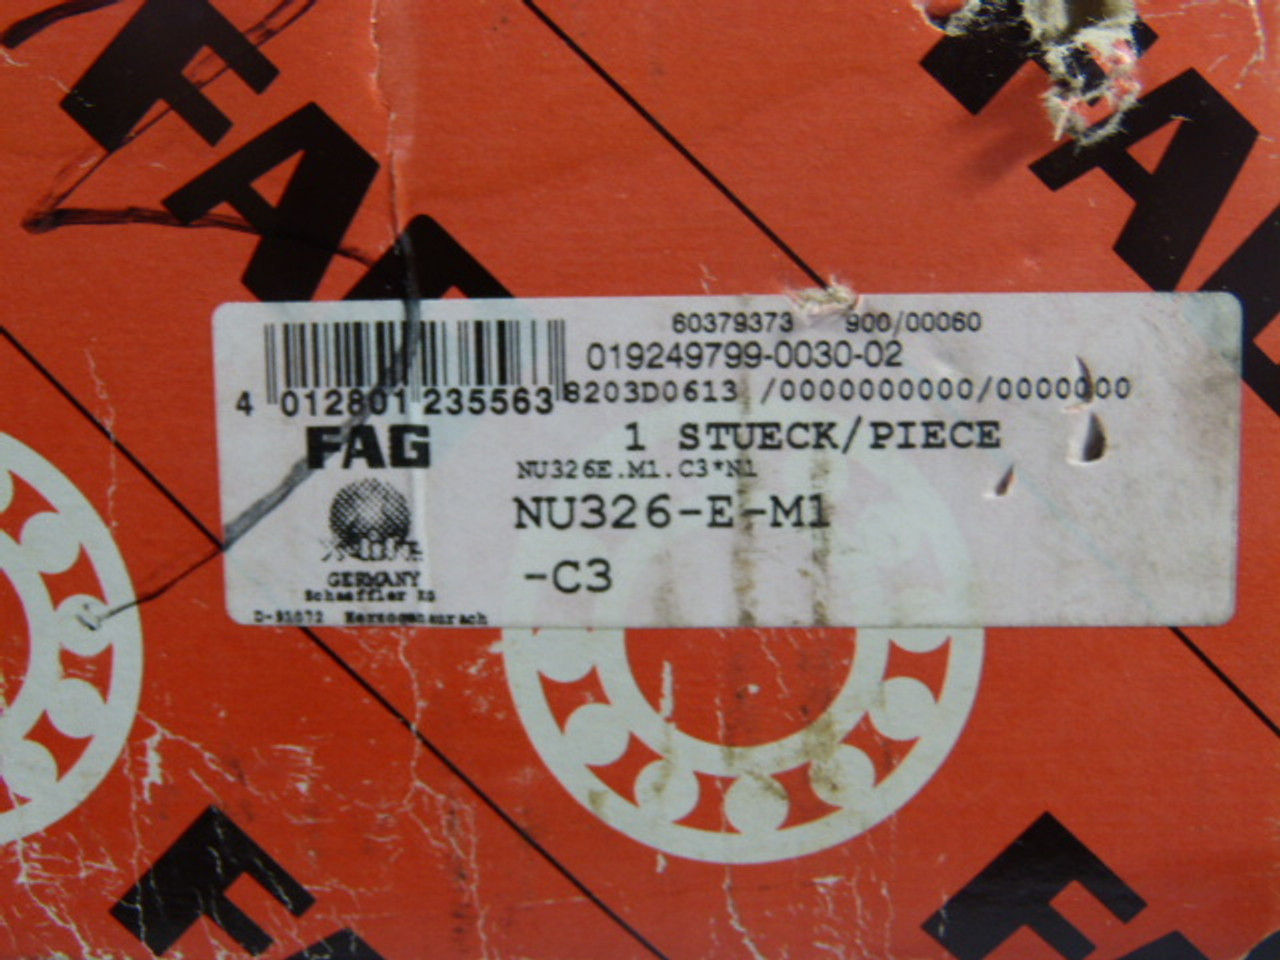 Fag NU326E.M1.C3 Cylindrical Roller Bearing ! NEW !